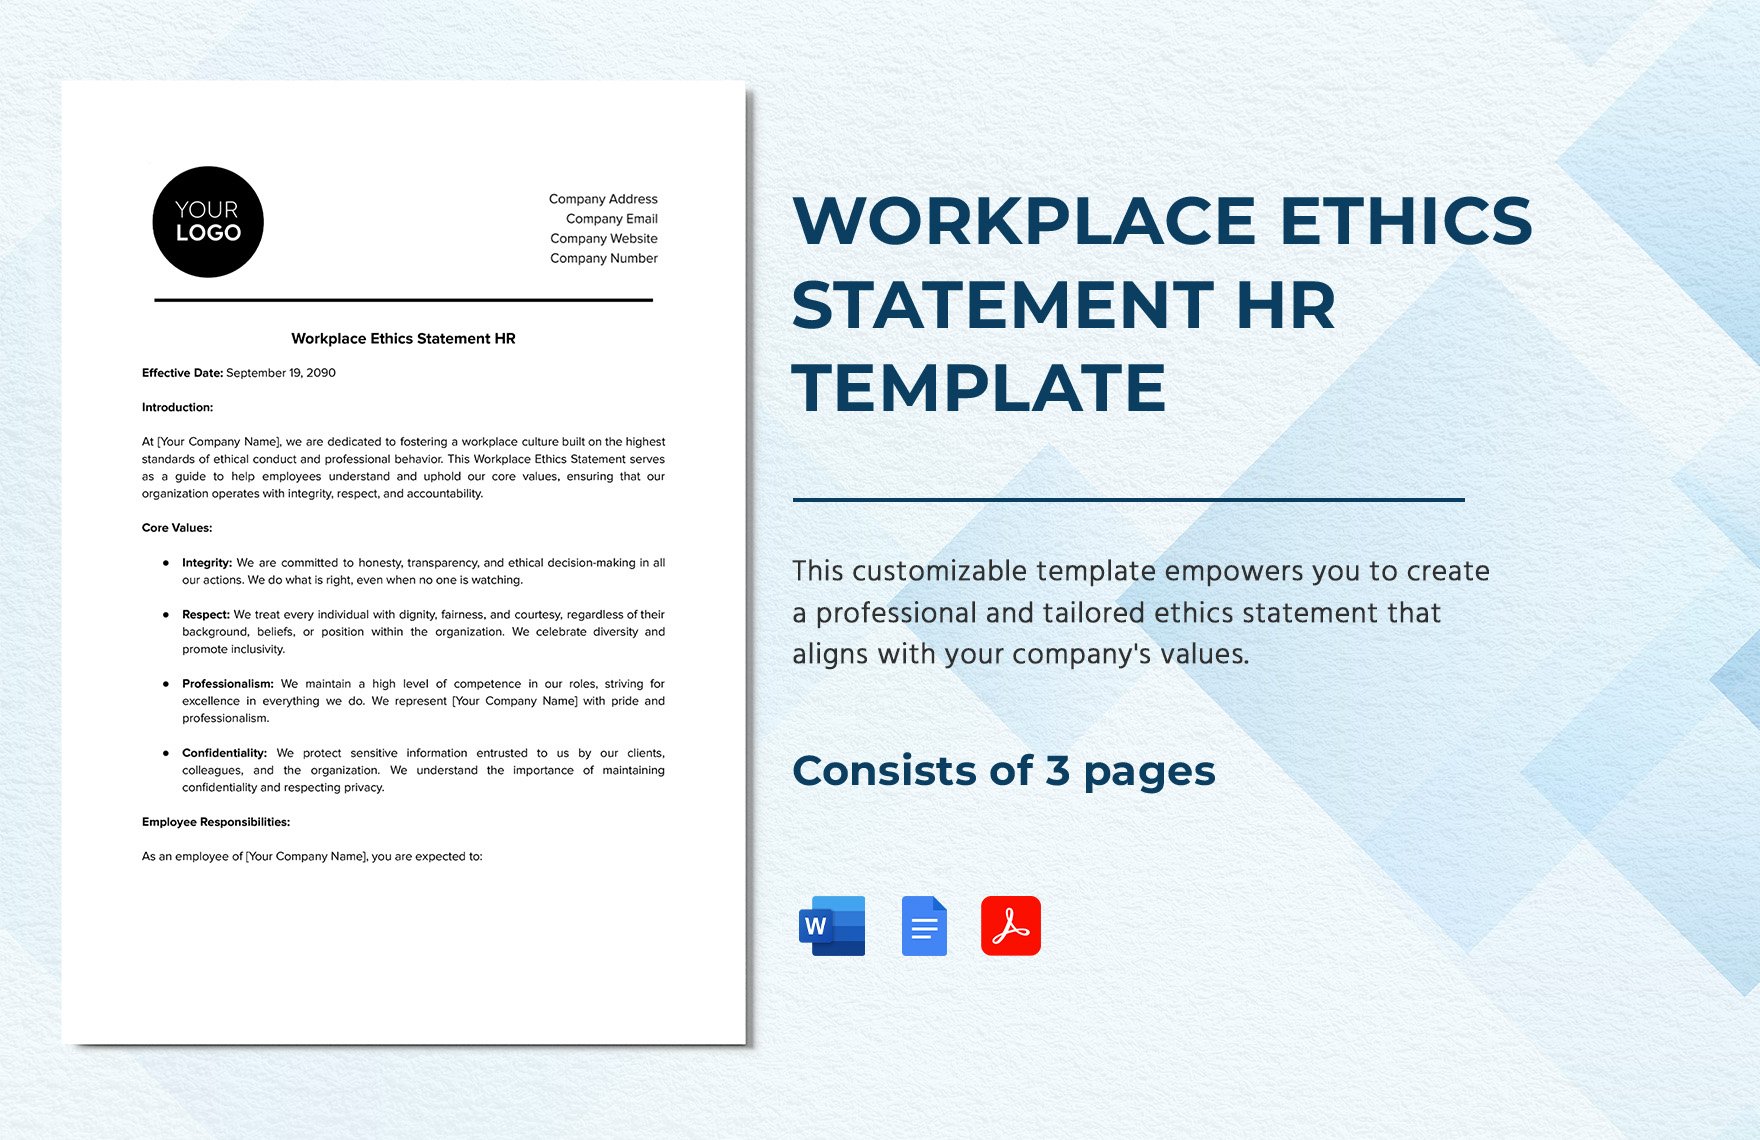 Workplace Ethics Statement HR Template in Word, Google Docs, PDF